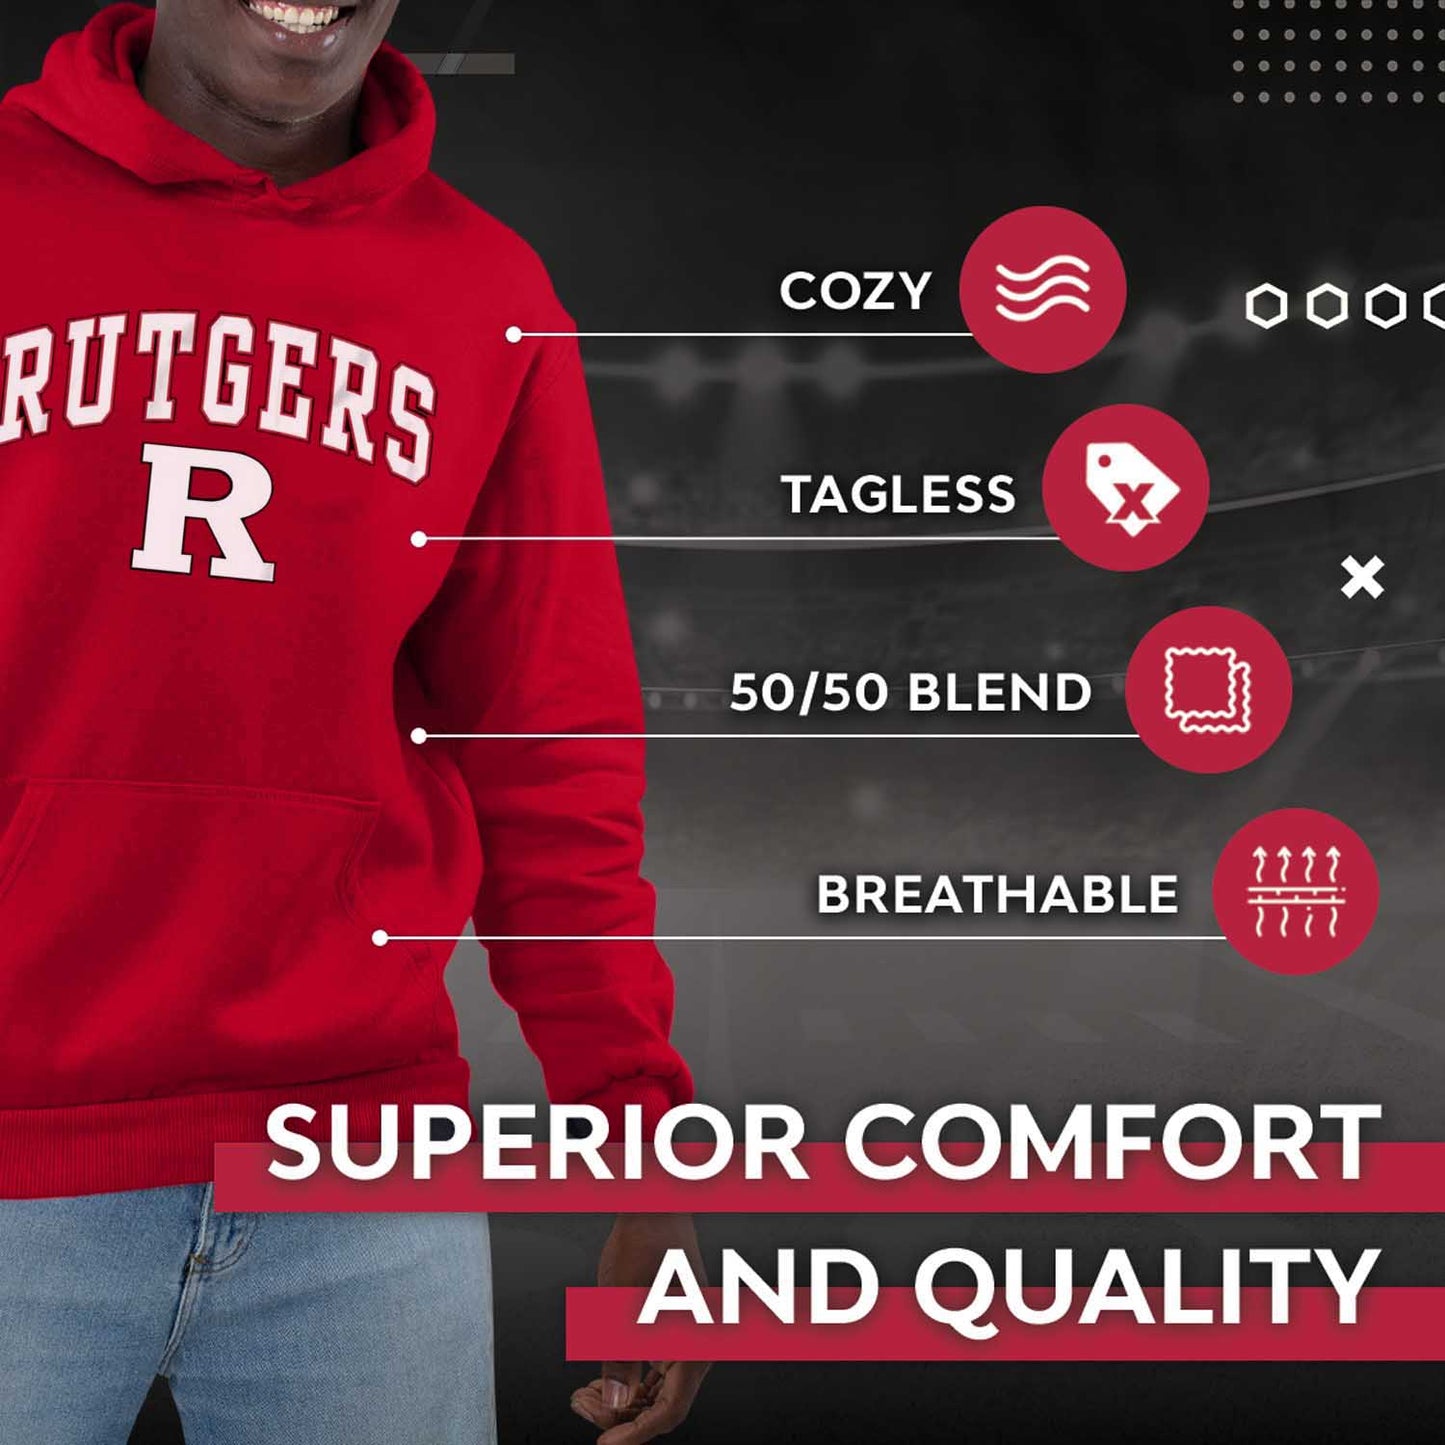 Rutgers Scarlet Knights Adult Arch & Logo Soft Style Gameday Hooded Sweatshirt - Red